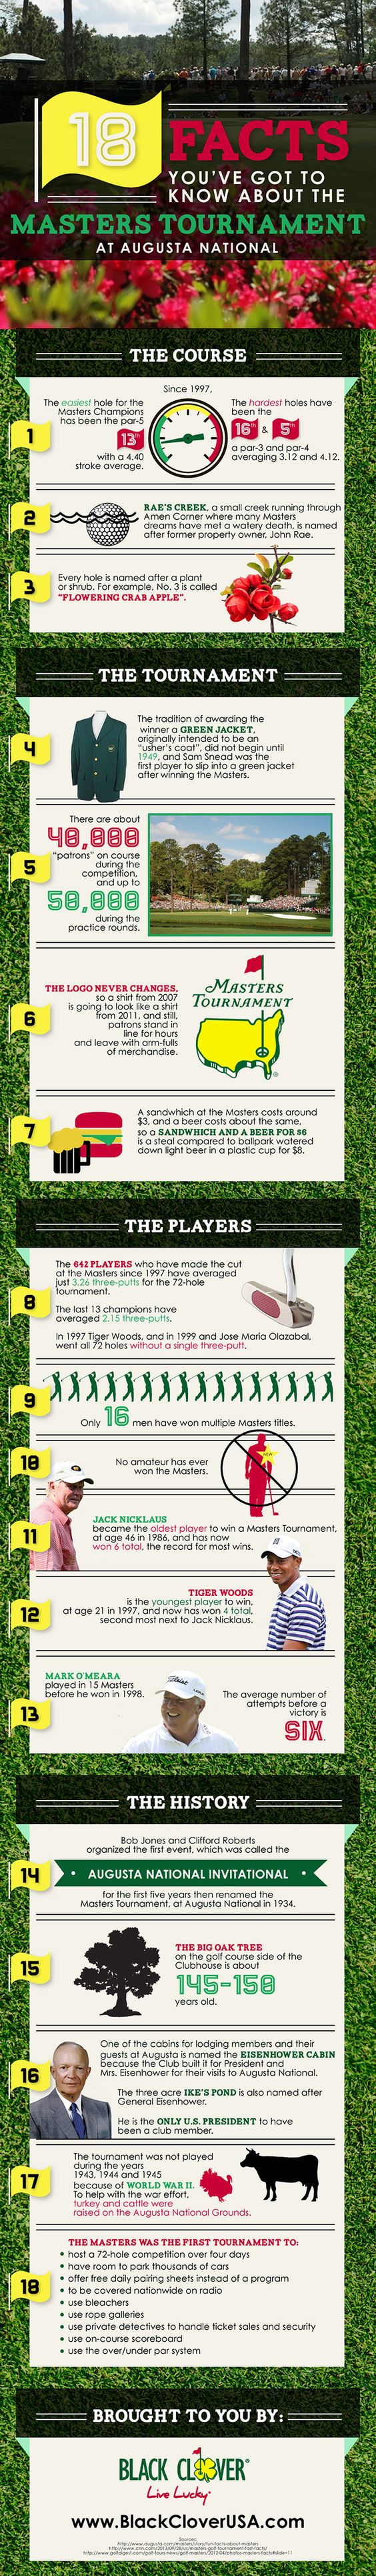 18 Facts on The Masters